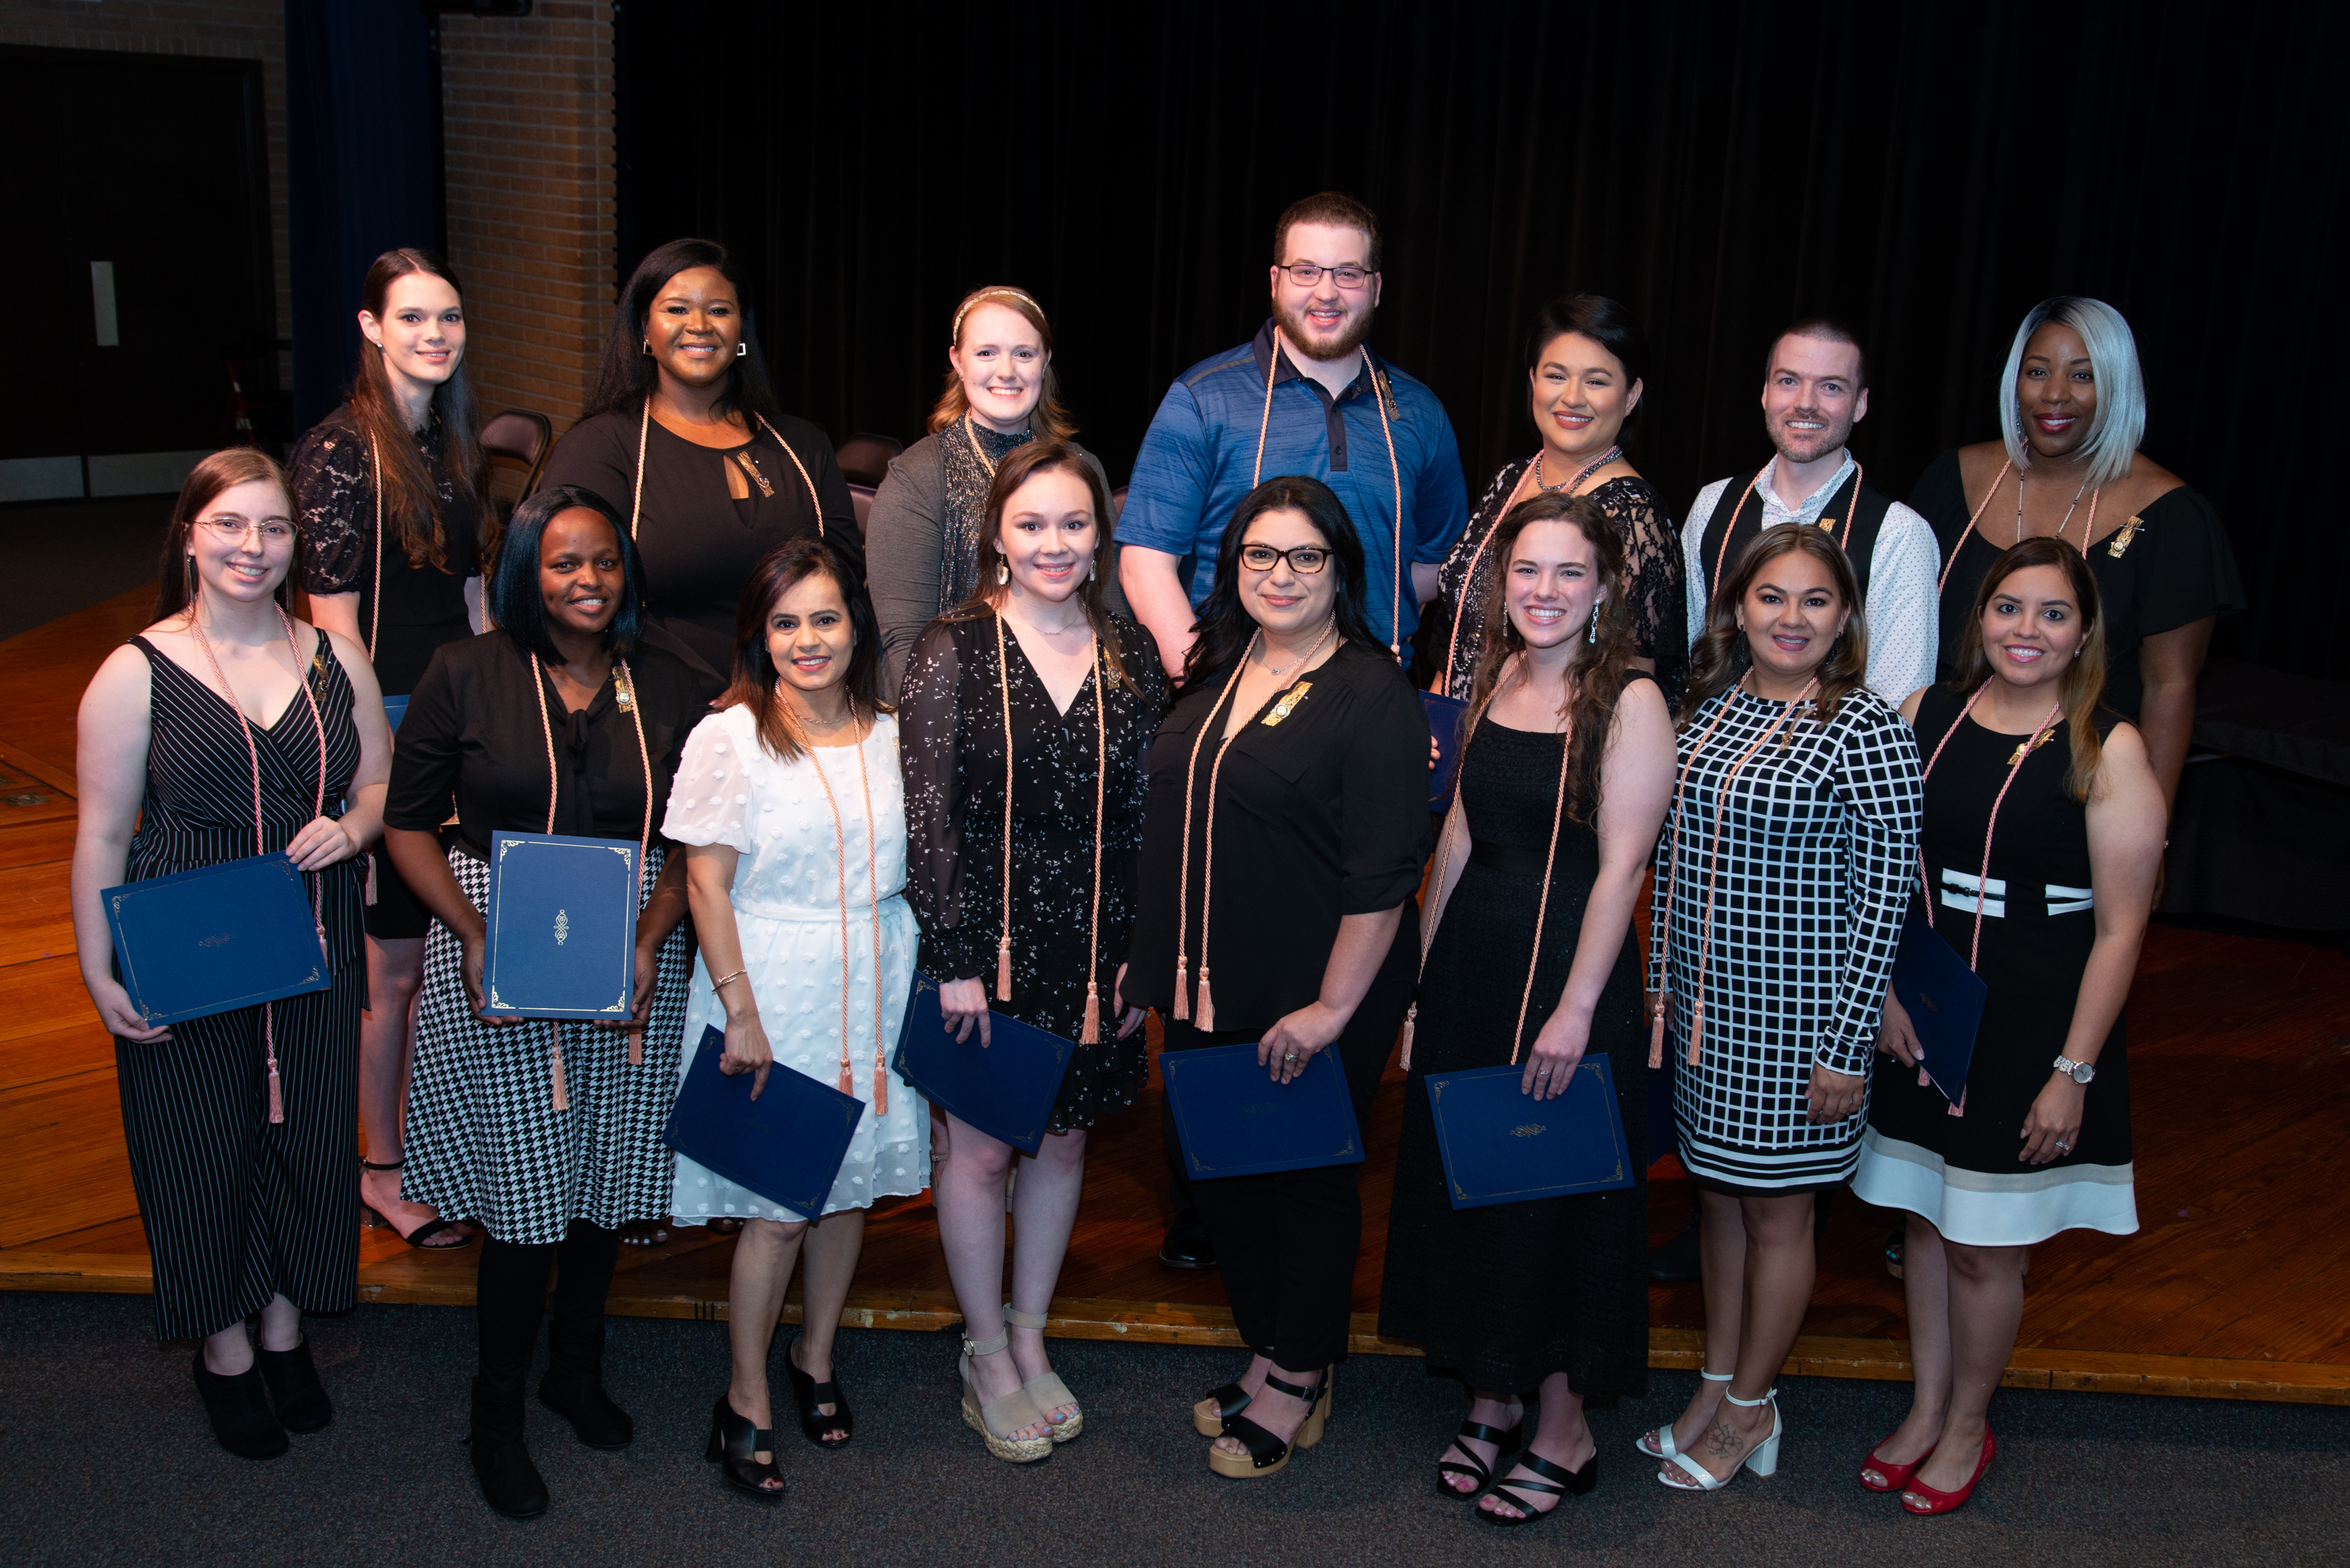 WITH HONORS - WCJC nursing students inducted into honor society